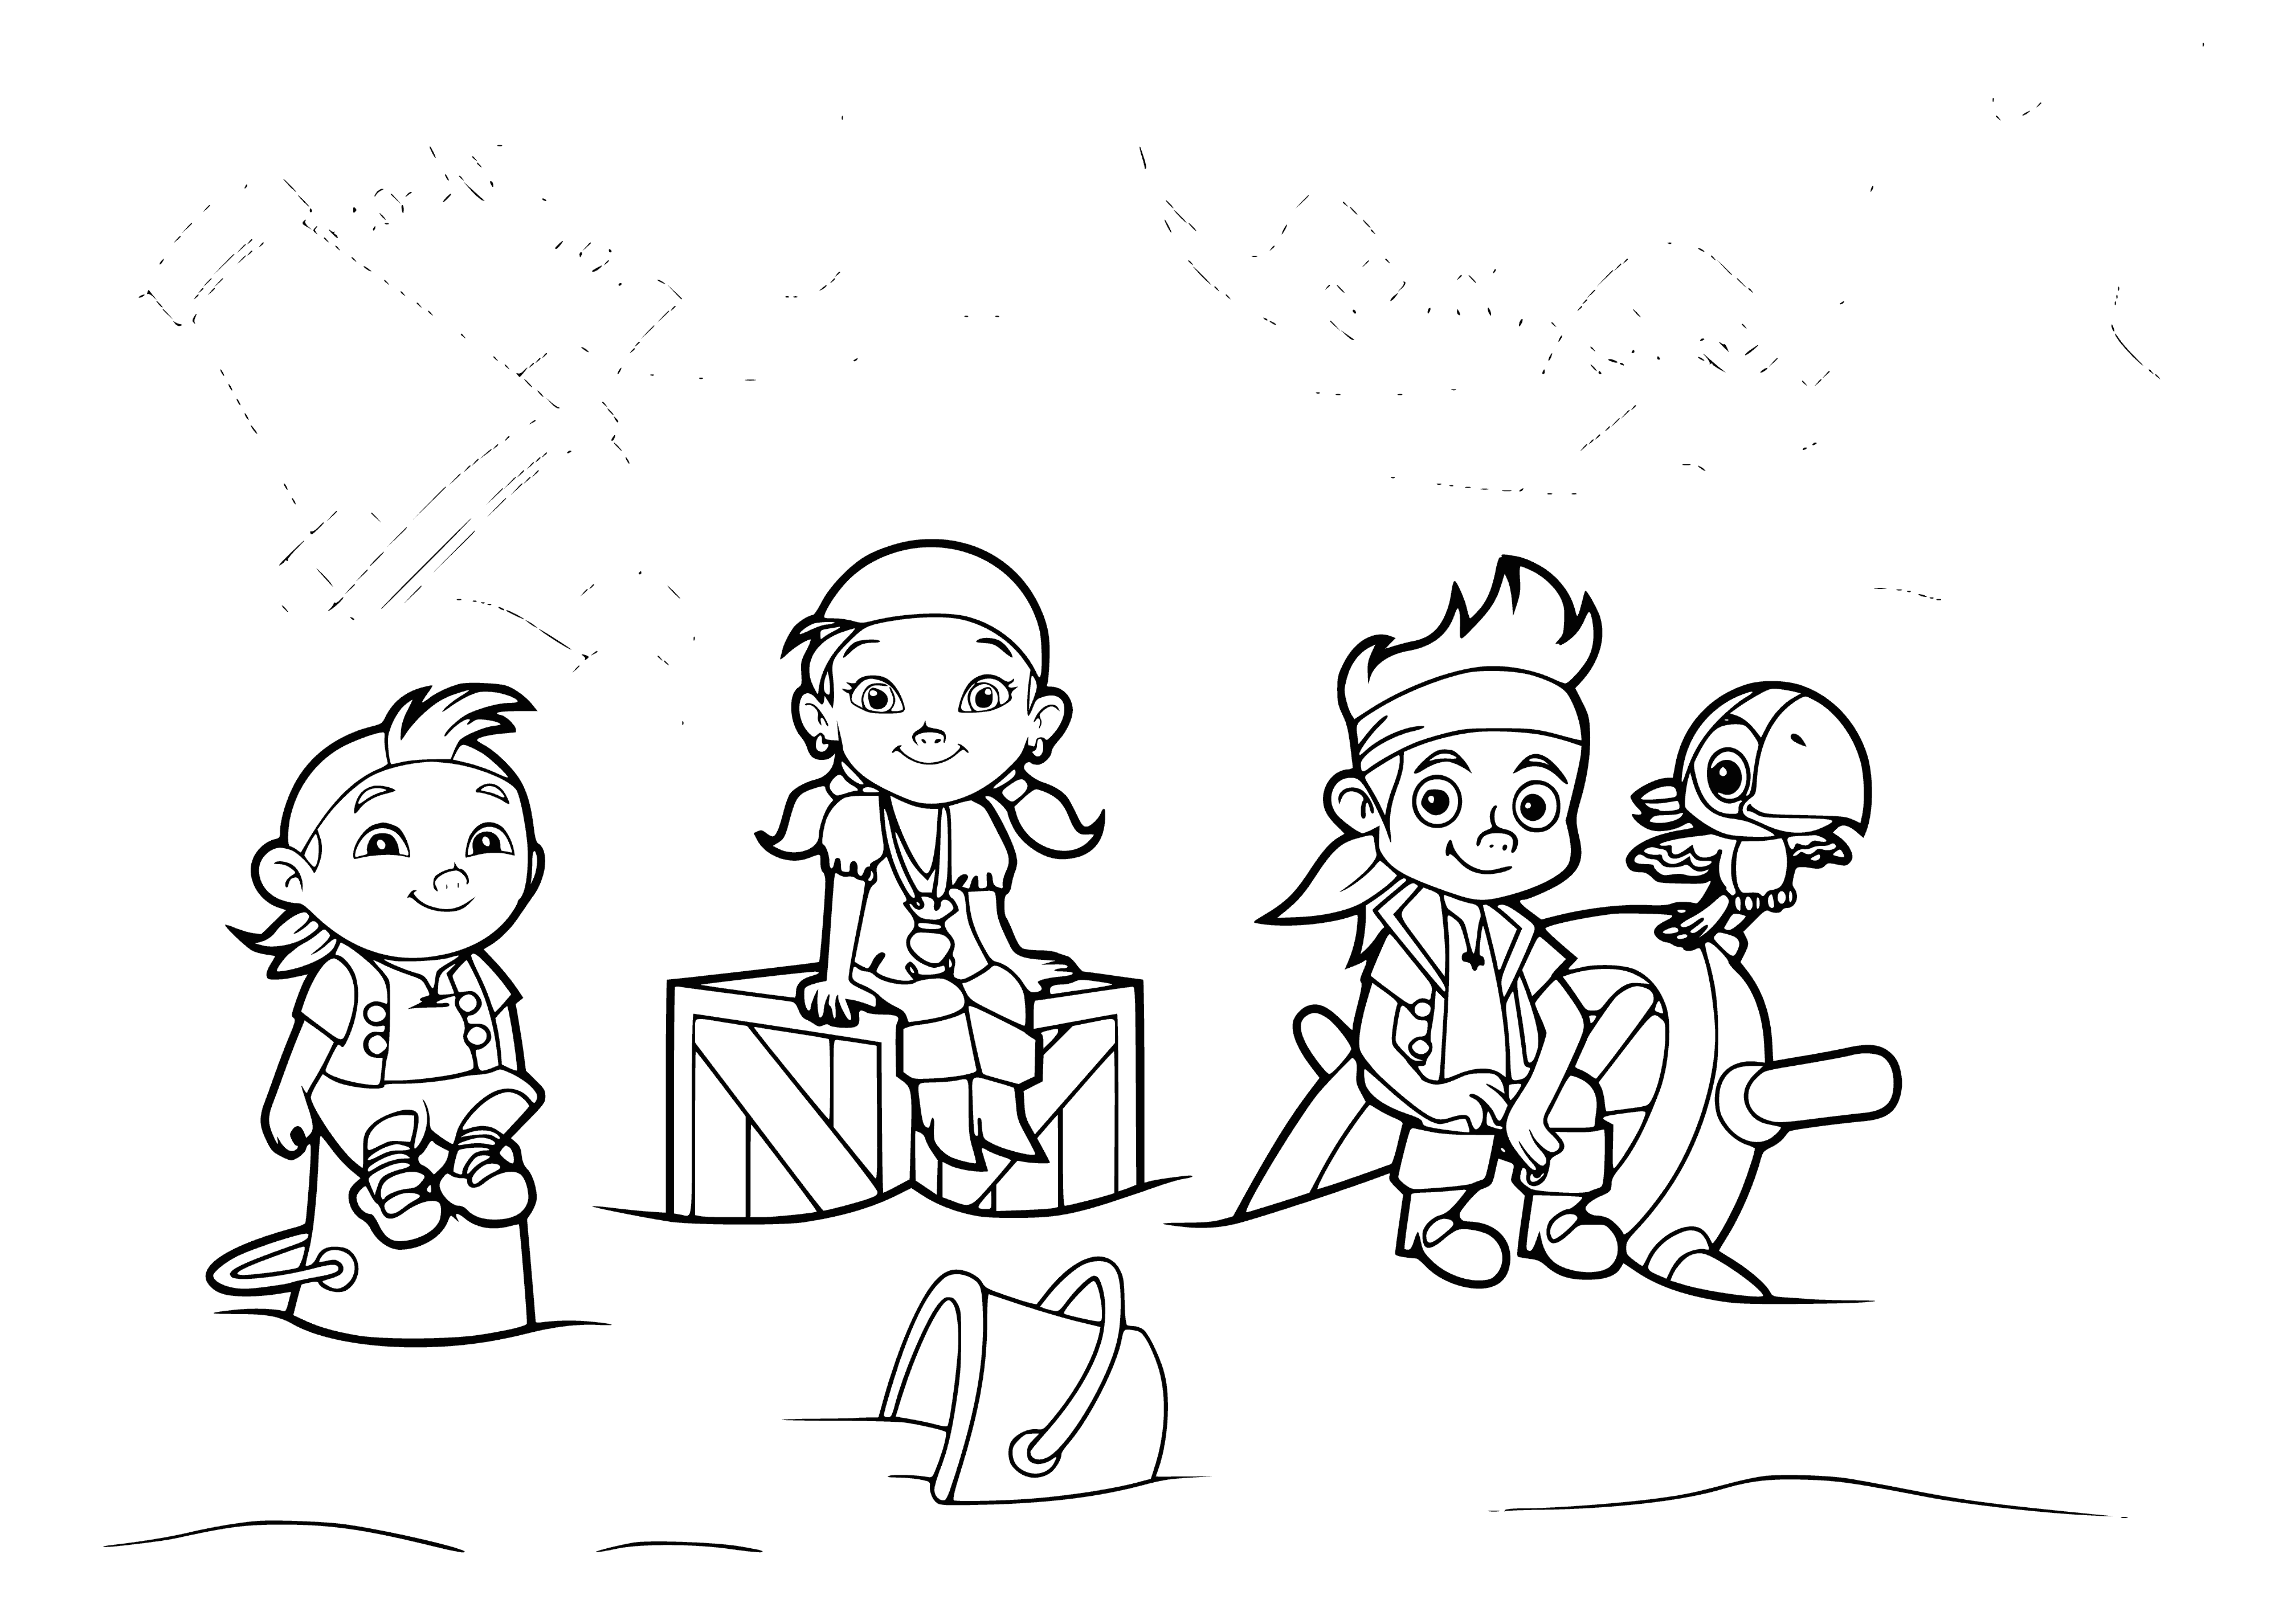 Cubby, Izzy, Jake and Scully coloring page